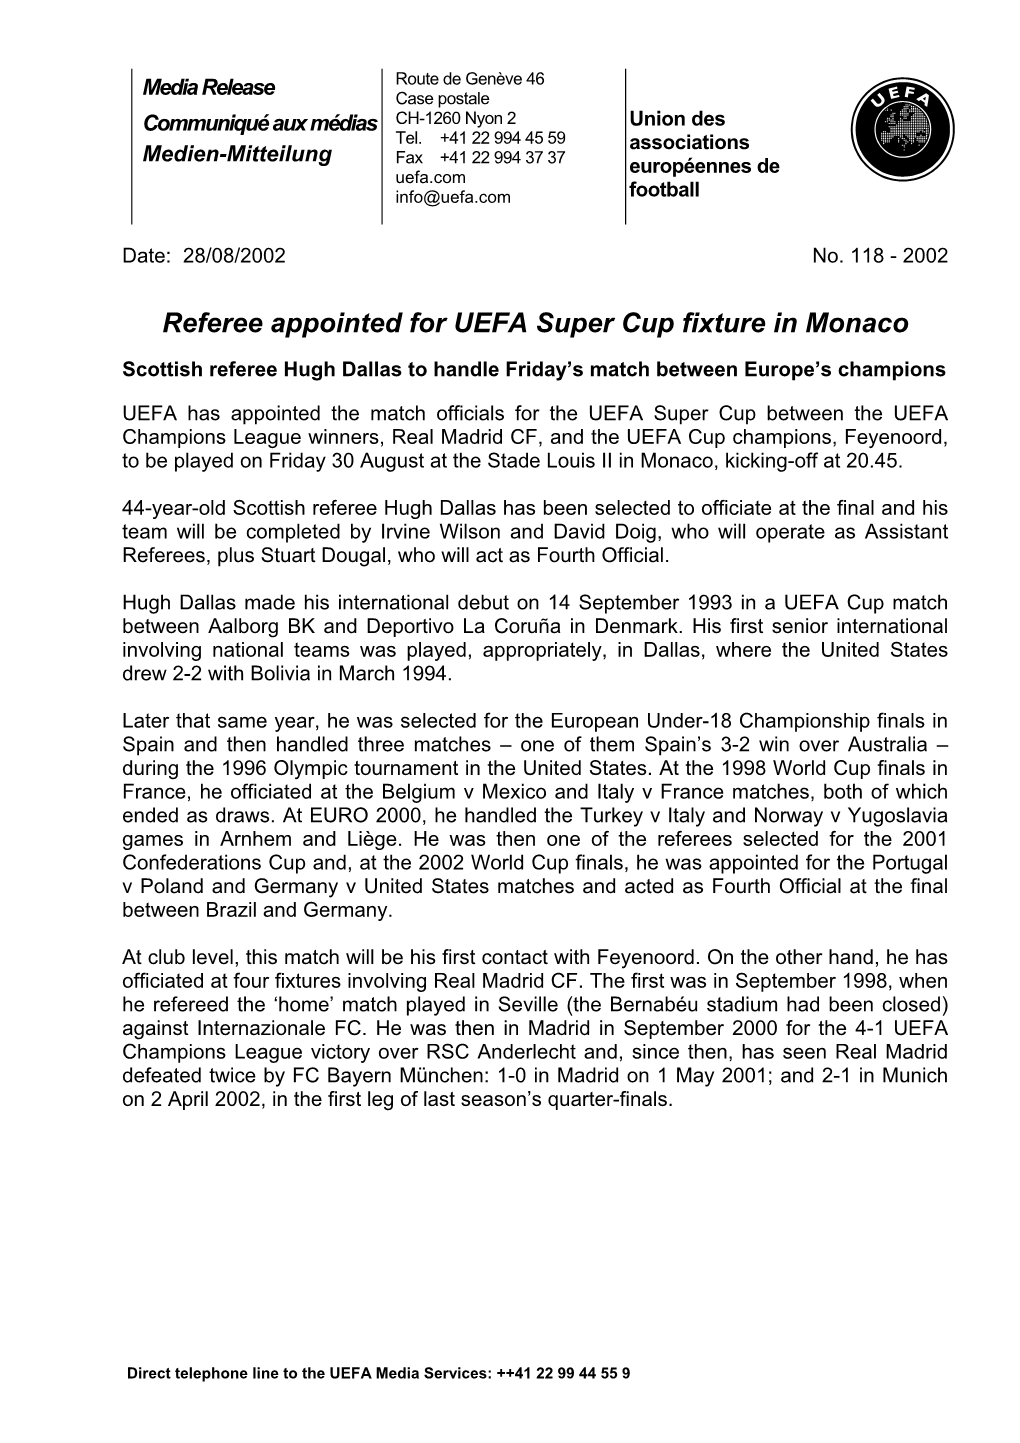 Referee Appointed for UEFA Super Cup Fixture in Monaco